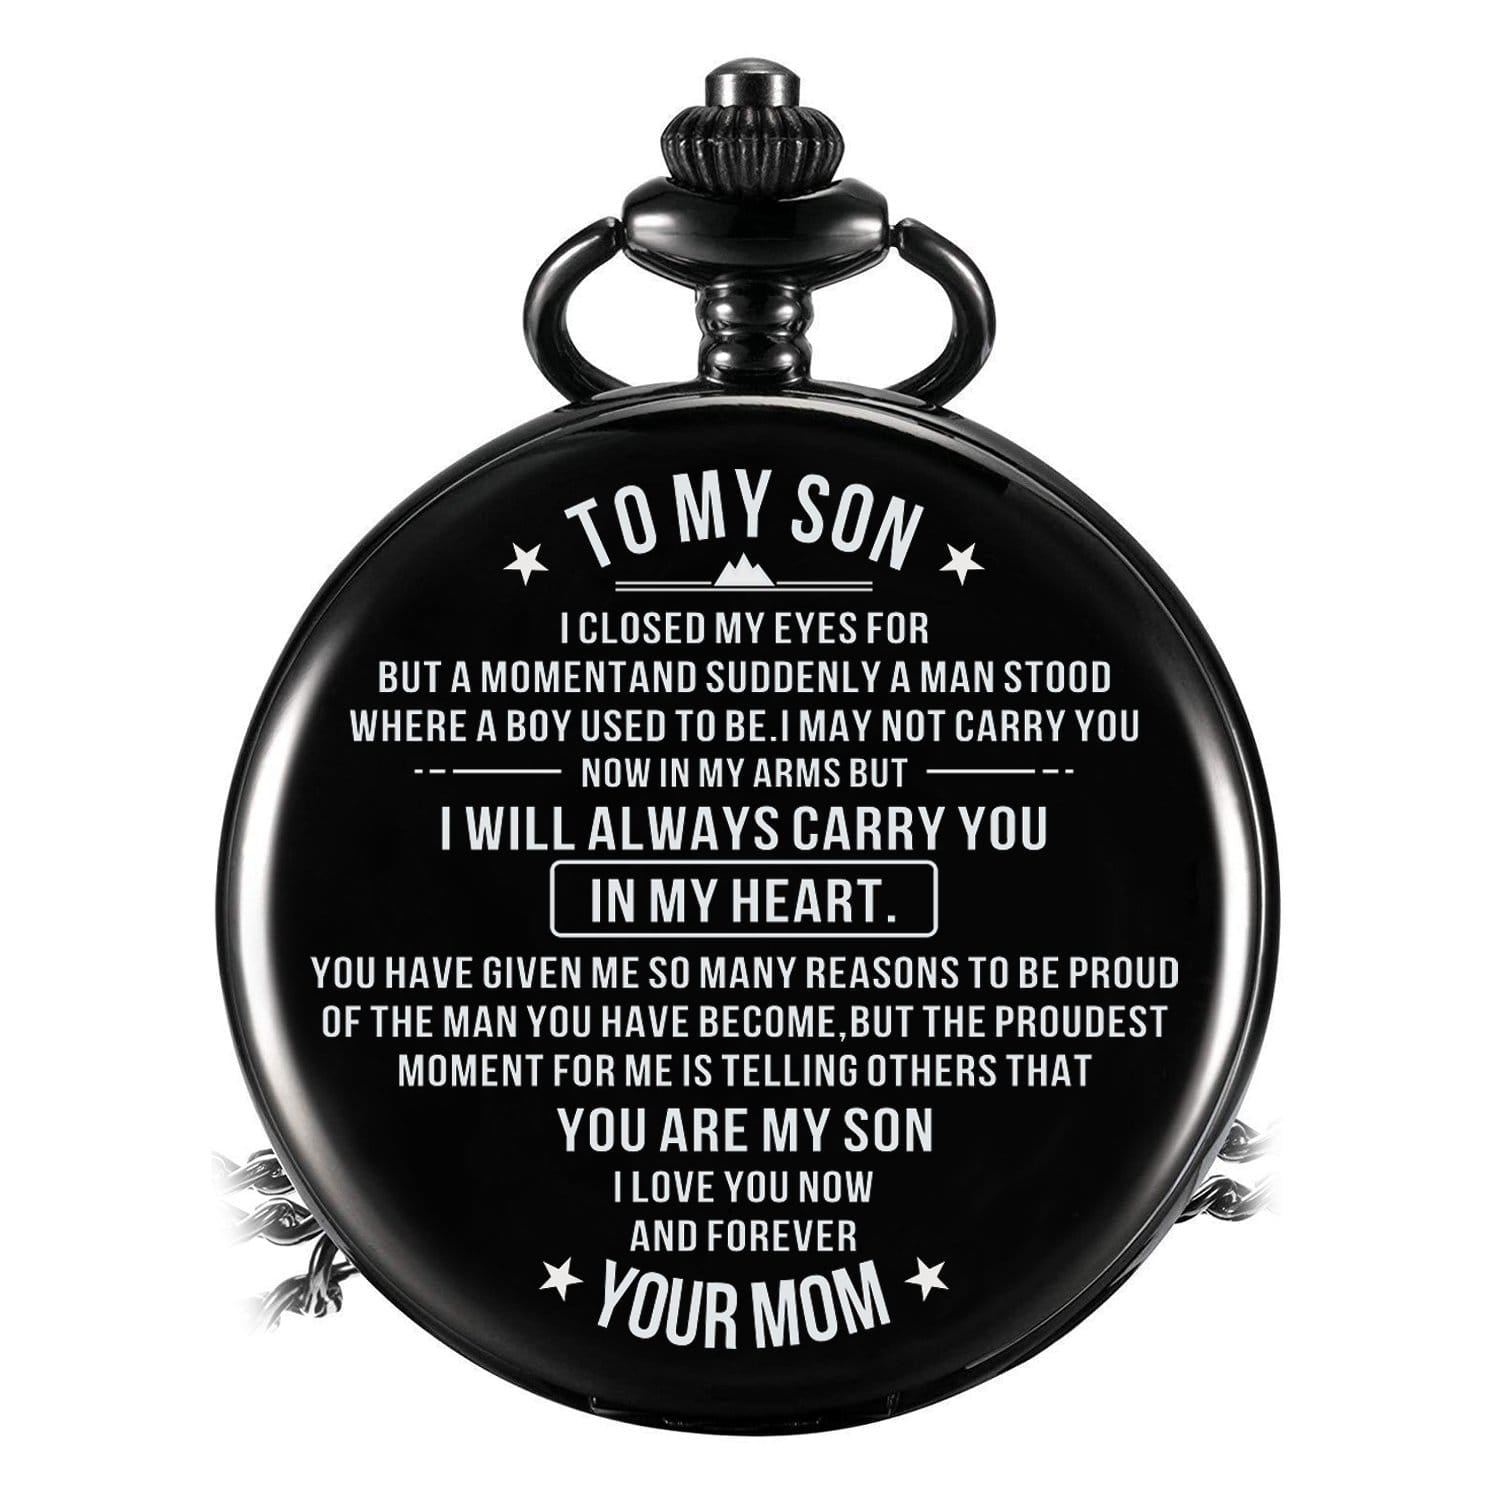 Pocket Watches Mom To Son - Carry You In My Heart Pocket Watch GiveMe-Gifts